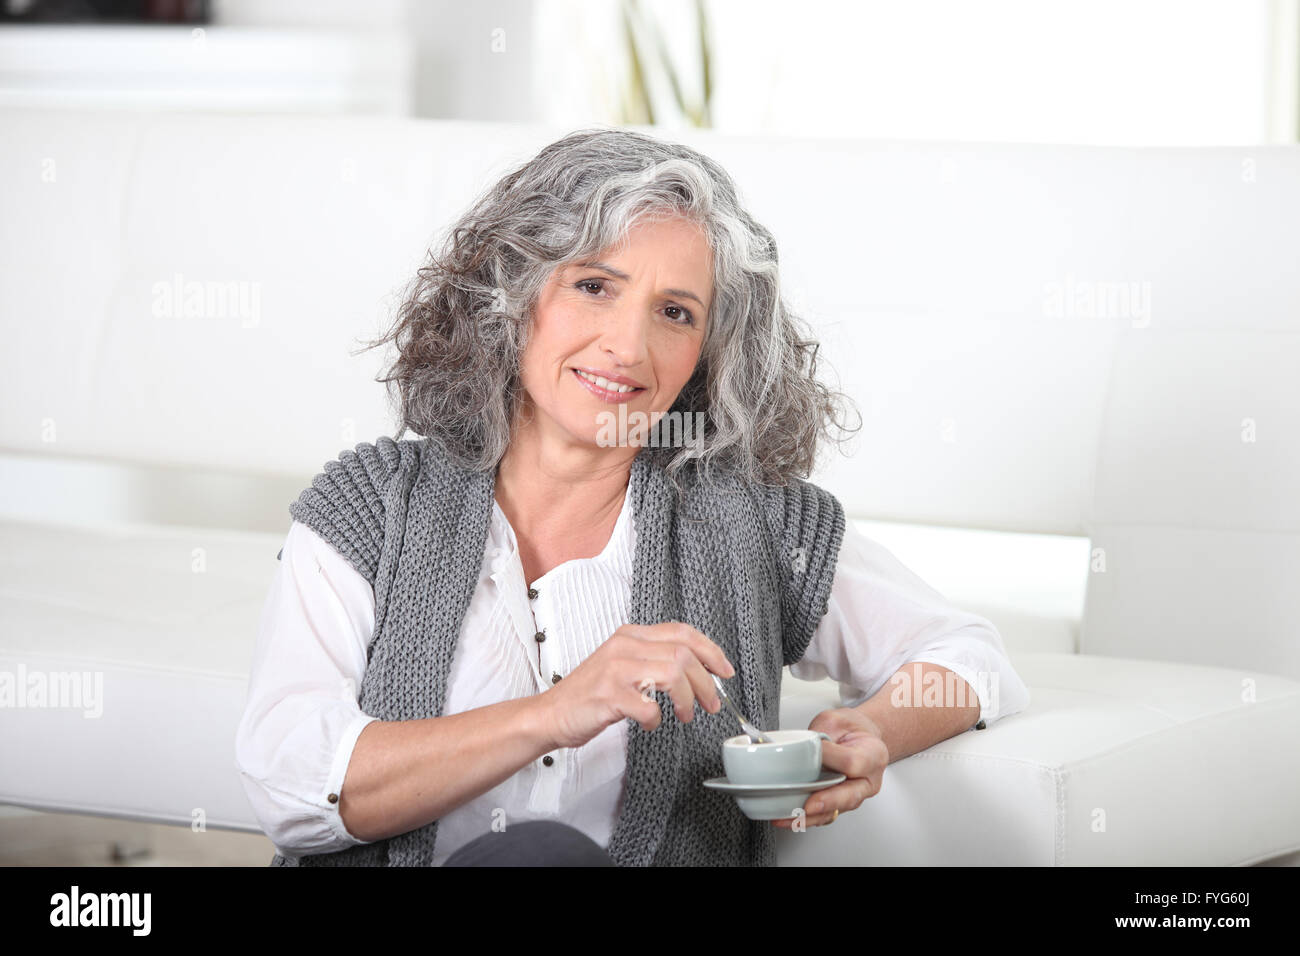 Woman sitting on the floor with a cup of coffee Stock Photo